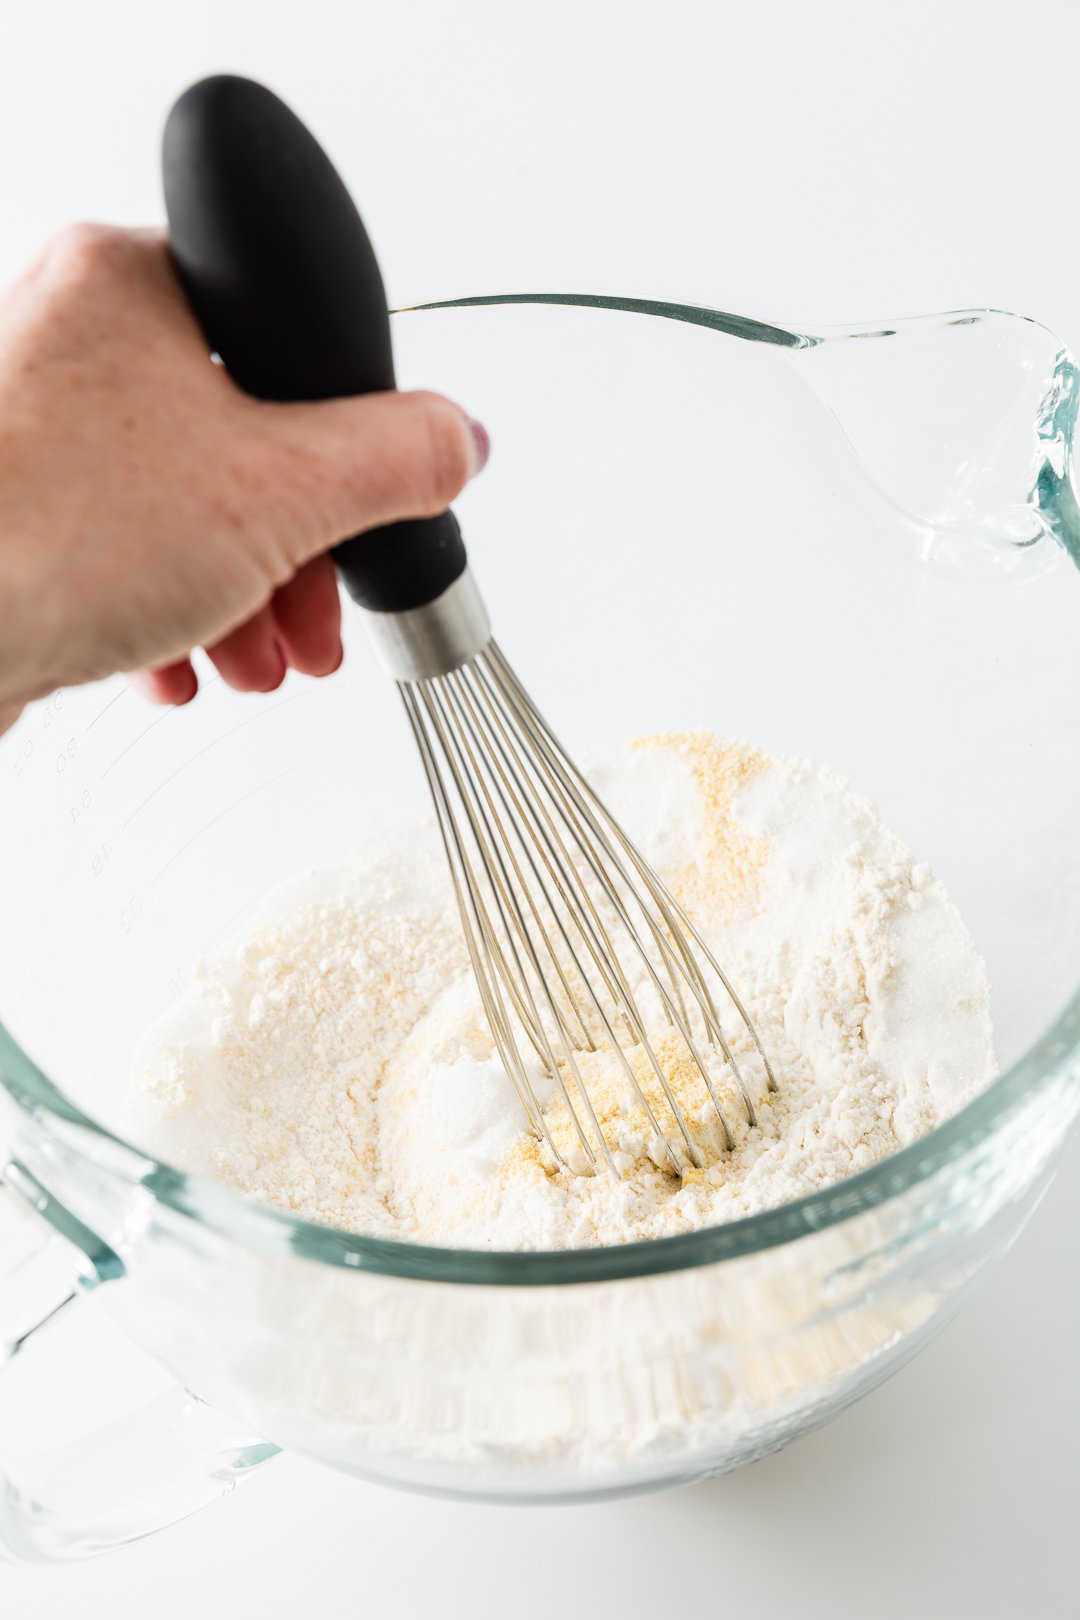 Whisking cornmeal and other dry ingredients